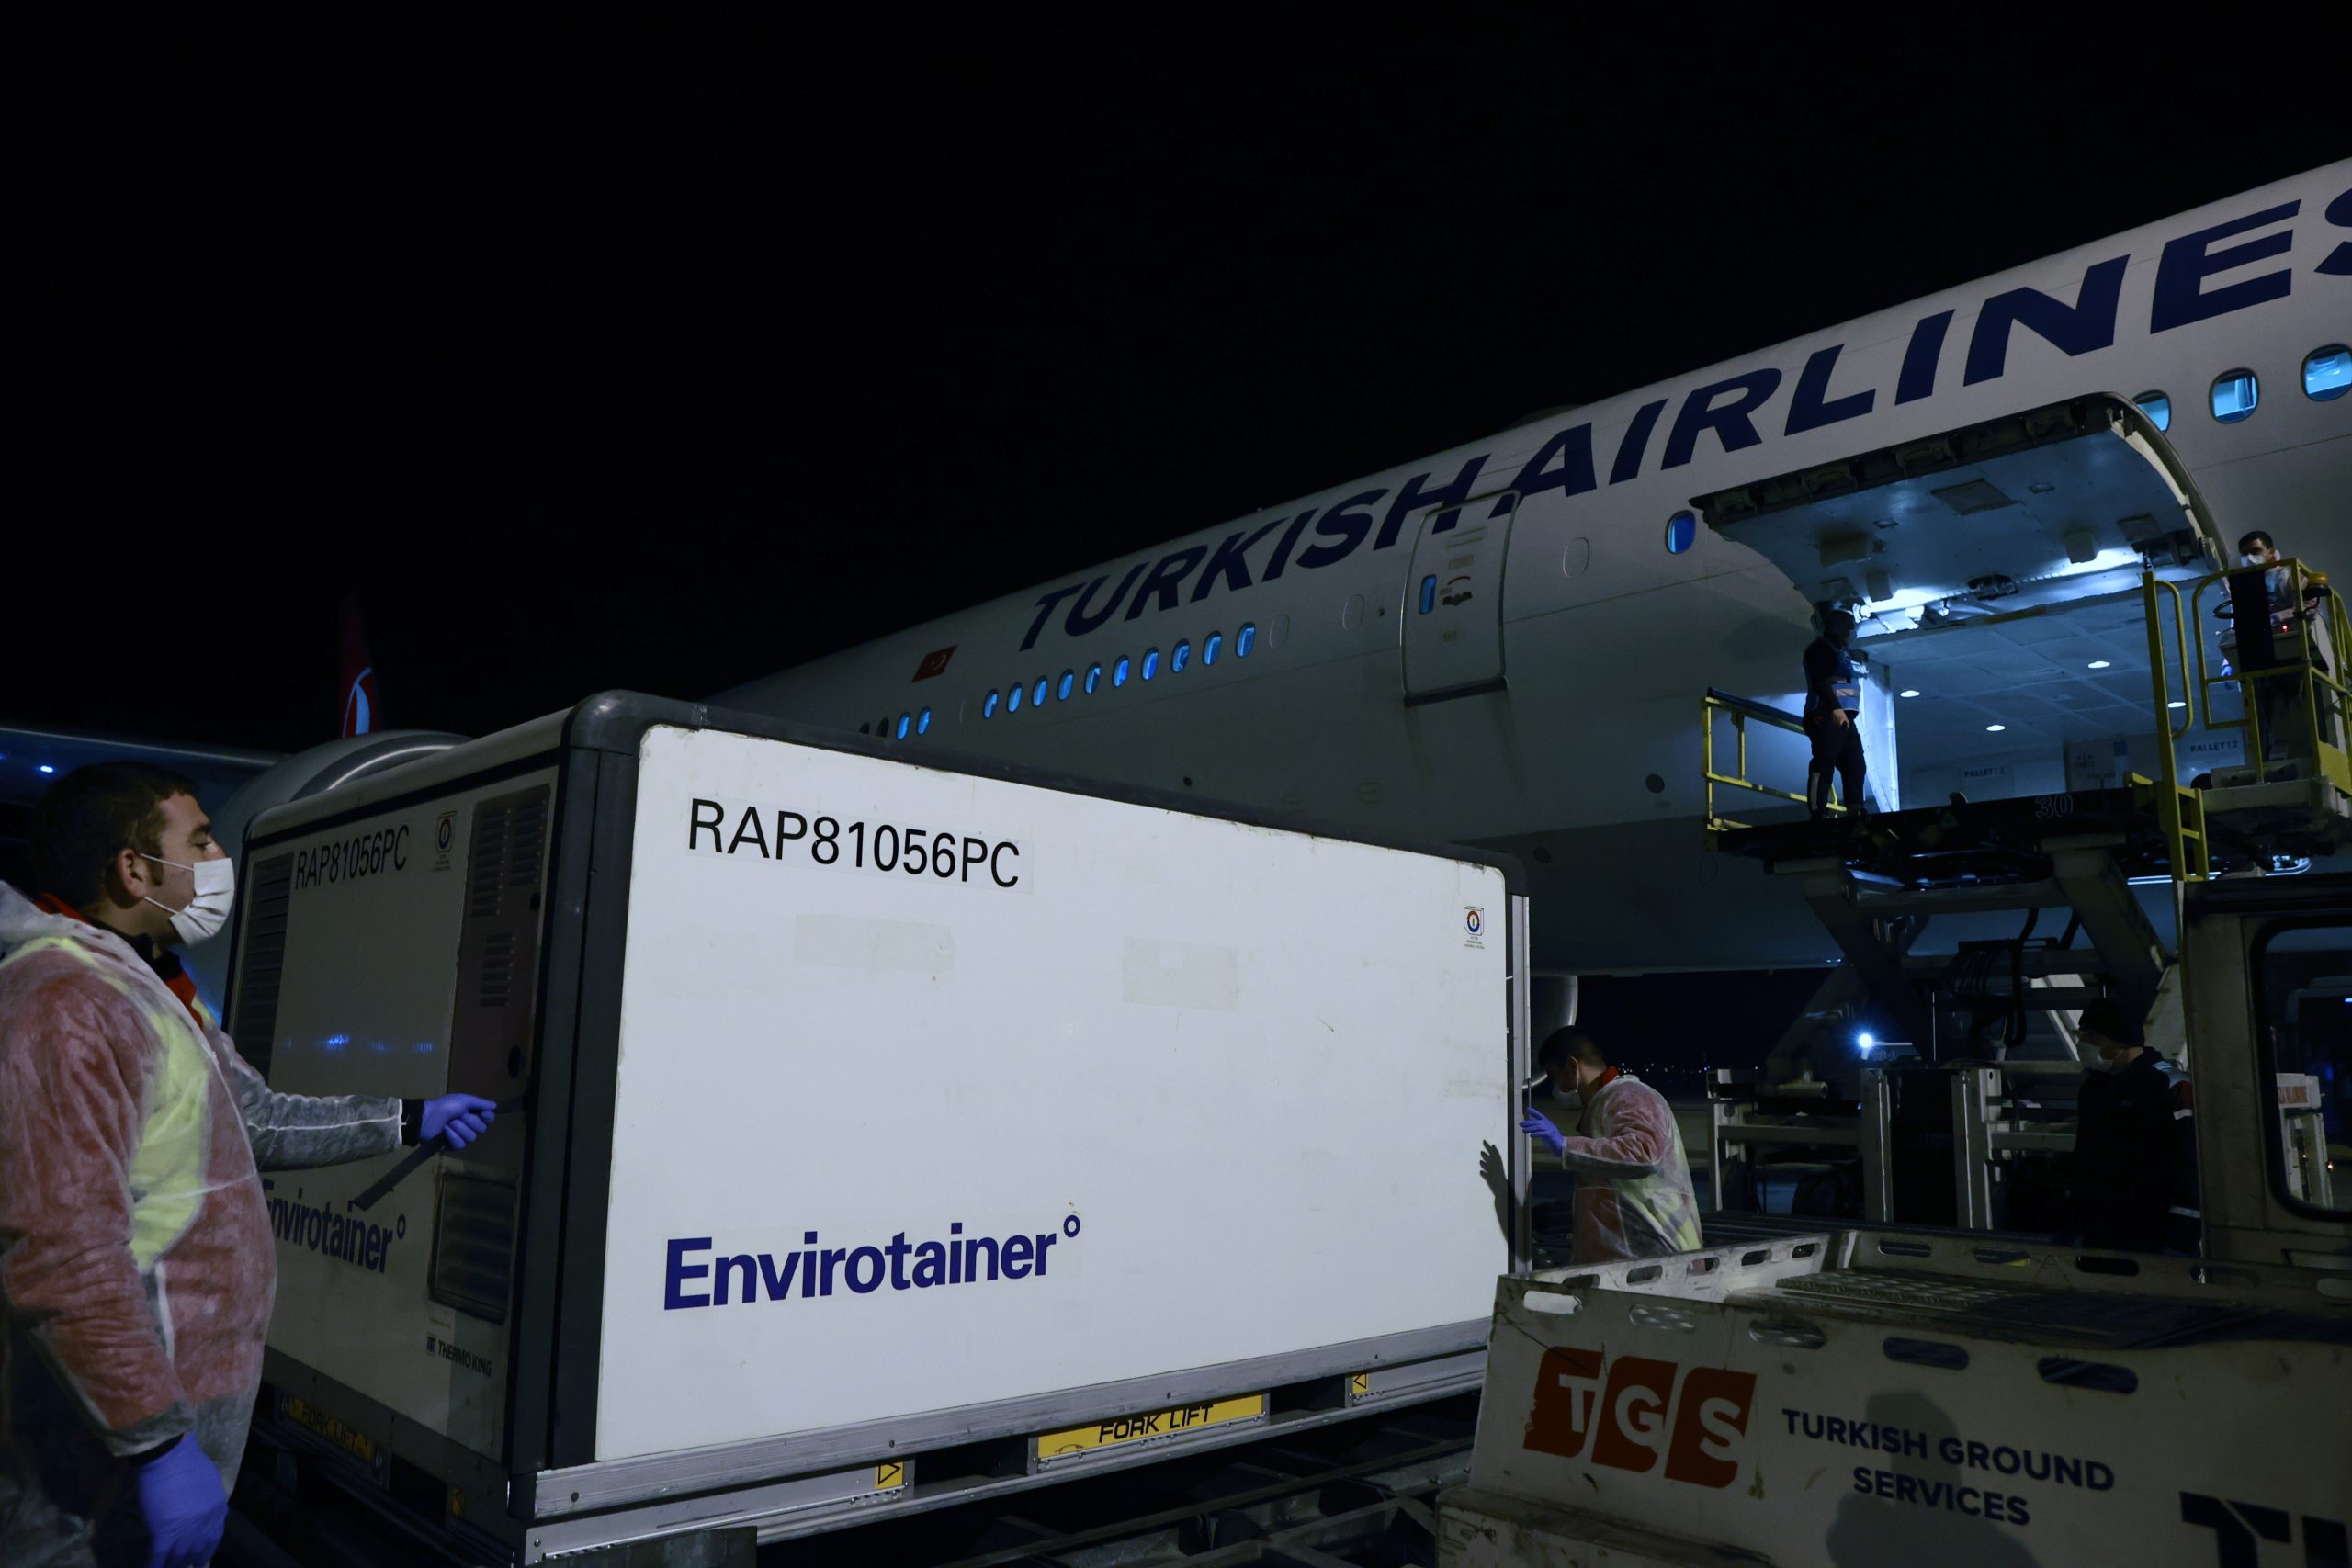 epa08911101 A handout photo made available by Turkish Health Ministry Press Office shows,  the first shipment of CoronaVac Covid-19 vaccines from the Chinese biopharmaceutical company Sinovac Biotech, unloaded from a plane upon its arrival at the Esenboga Airport, in Ankara, Turkey, 30 December 2020. Turkish government in November 2020 has signed a contract to buy 50 million doses of Chinese manufacturer Sinovac coronavirus vaccine ‘CoronaVac’, to be delivered in batches between December 2020 and February 2021.  EPA/AYTUG CAN SENCAR HANDOUT  HANDOUT EDITORIAL USE ONLY/NO SALES